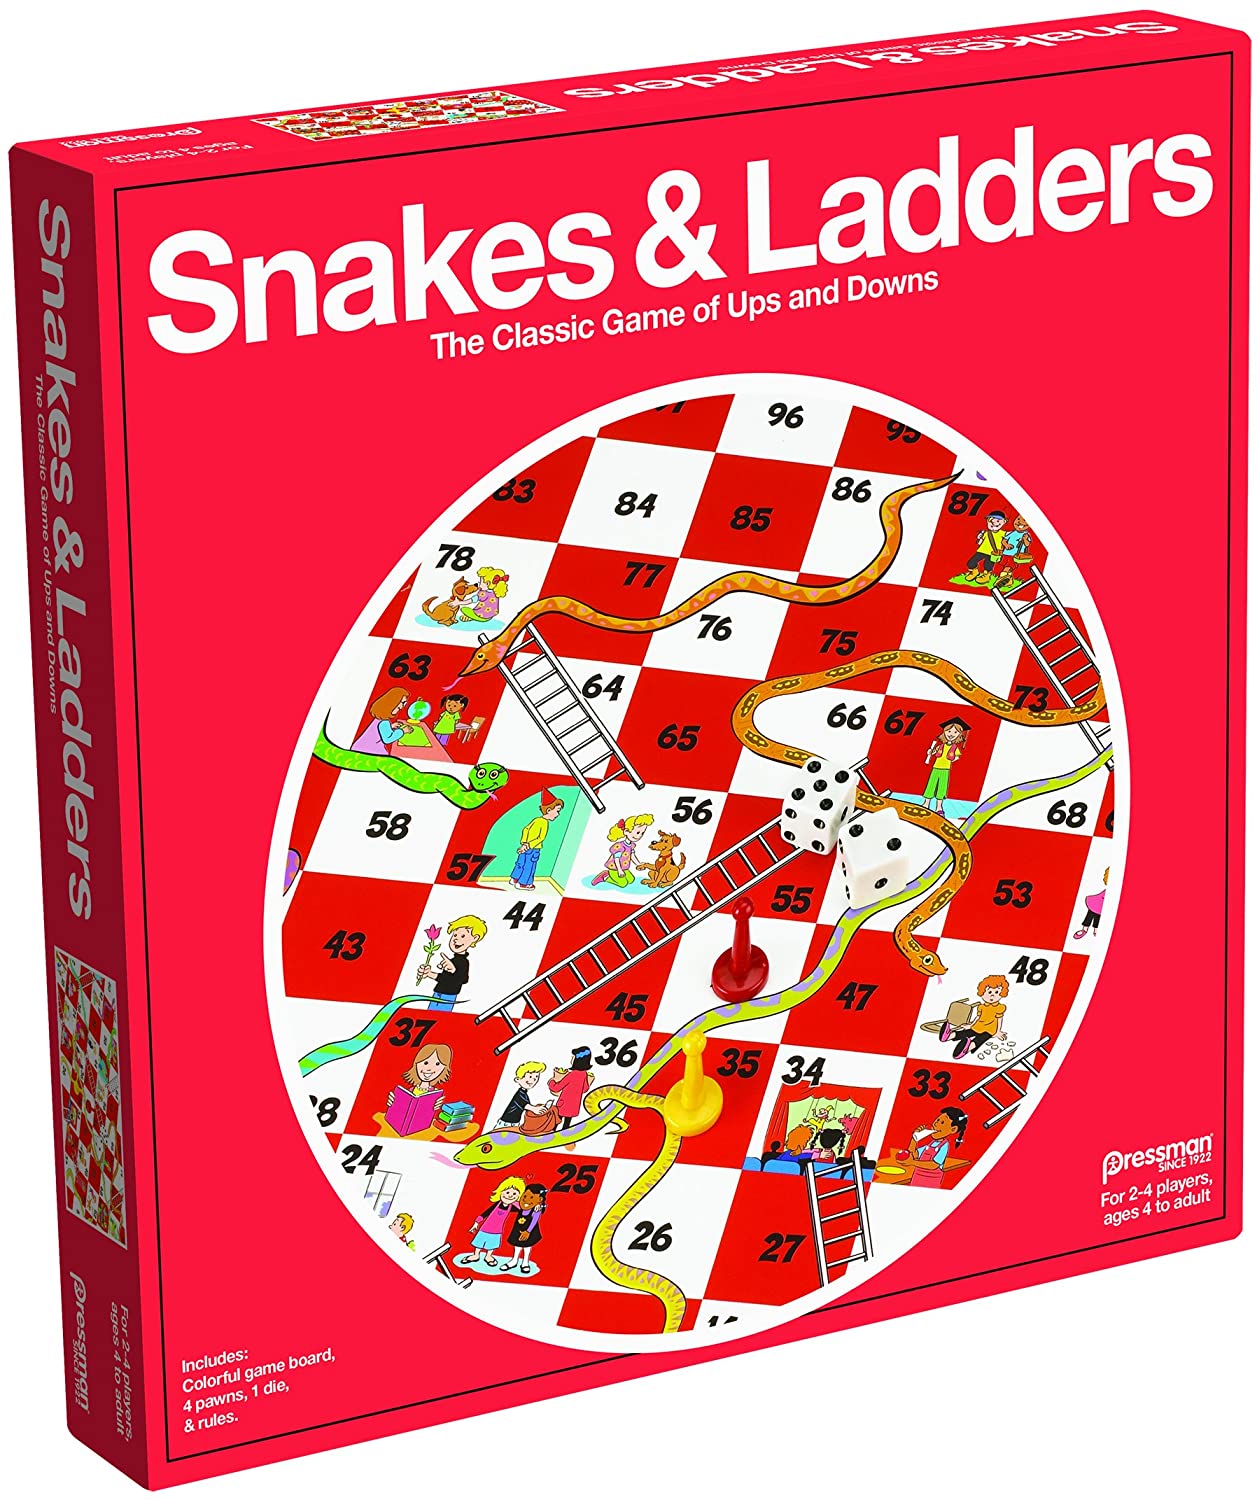 Pressman Snakes & Ladders family board games 2-4 Players, age 4-12